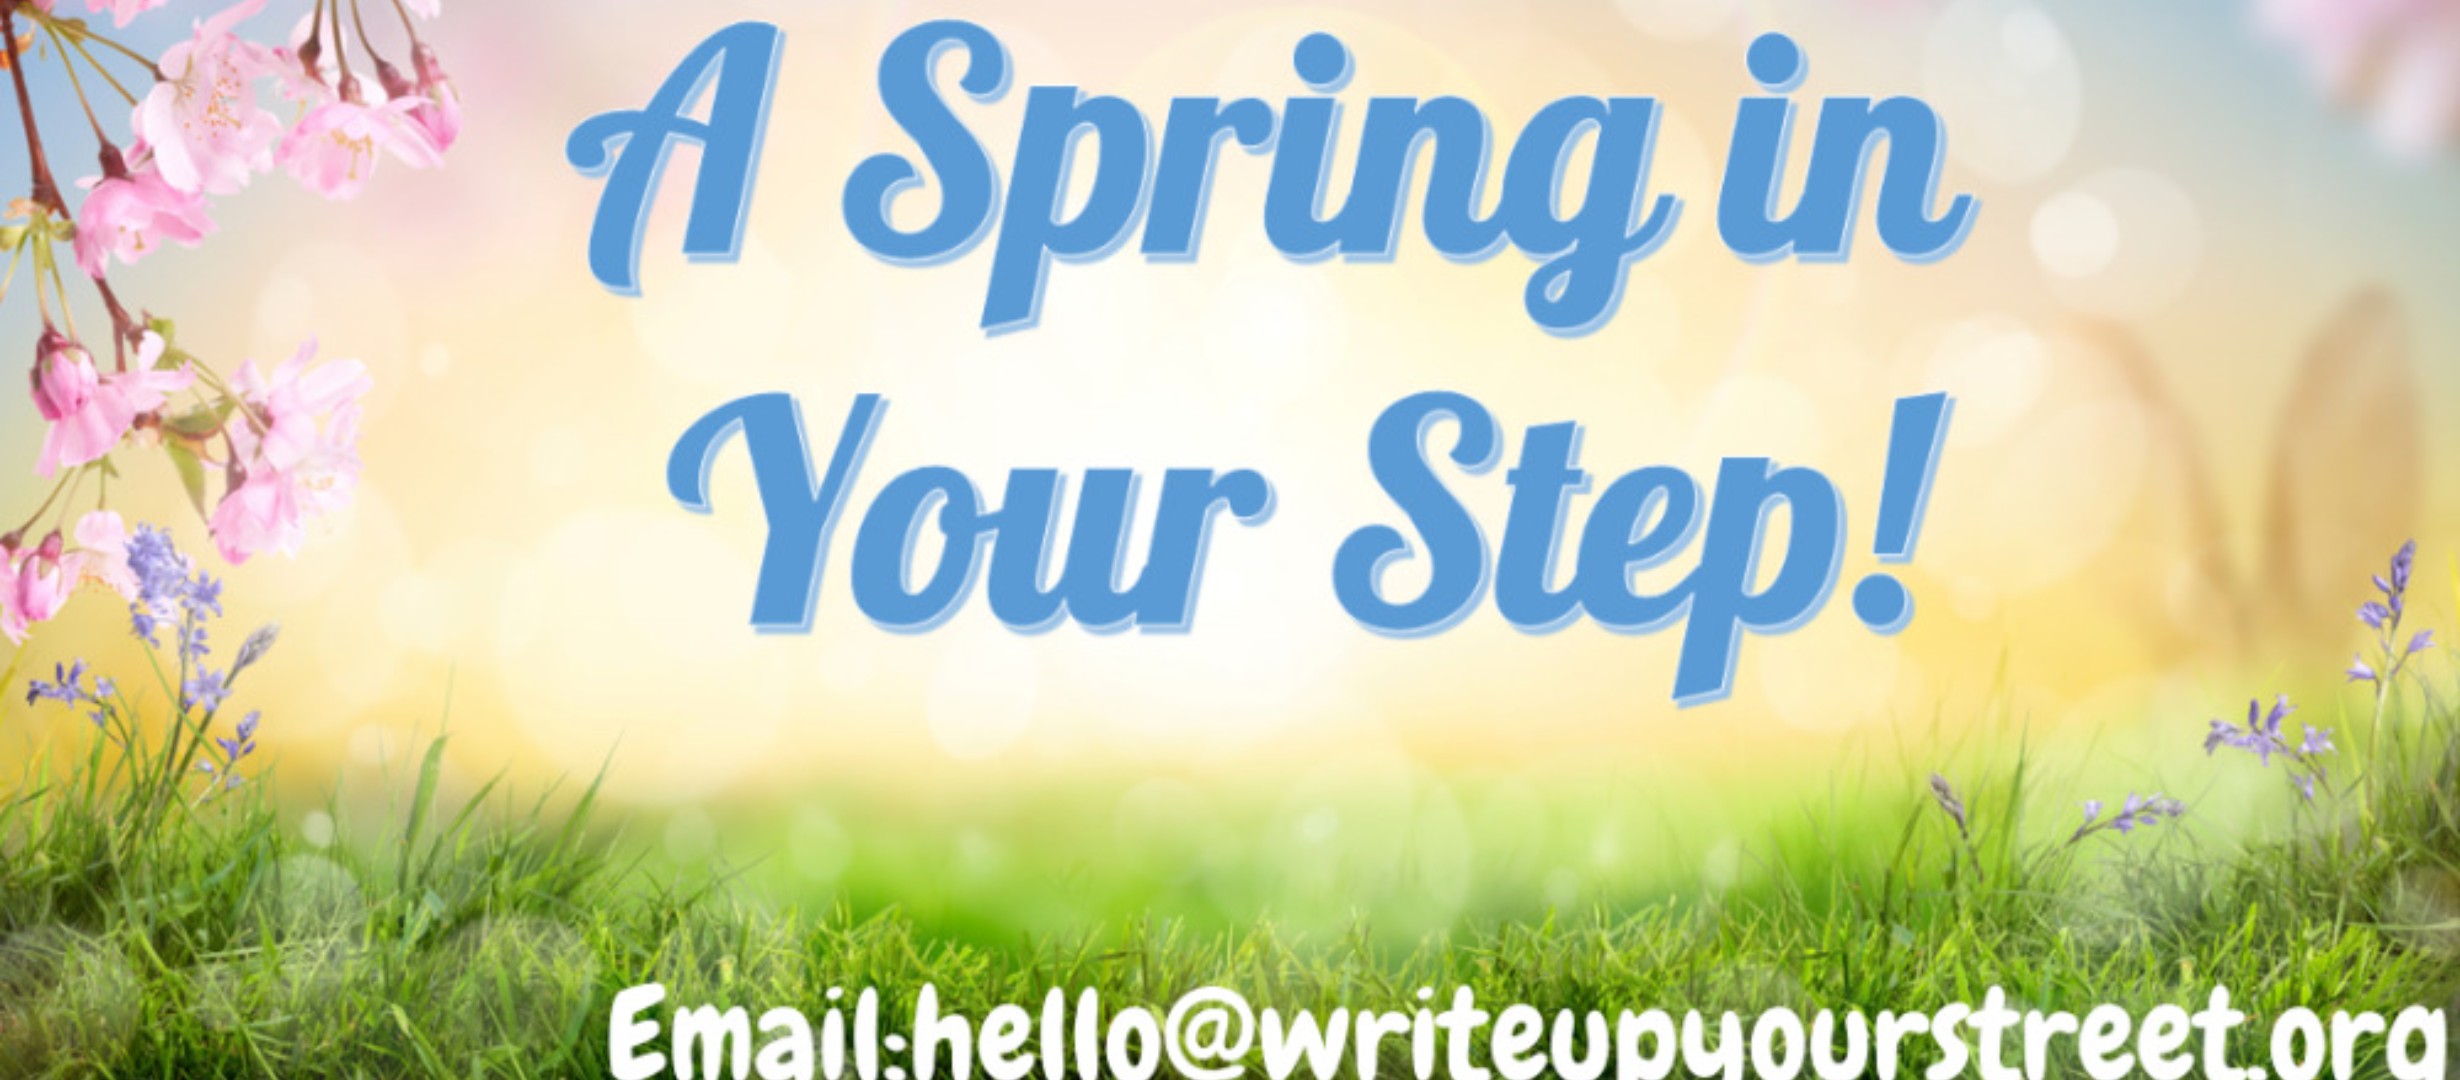 image of grass and flowers, text reads 'a spring in your step/ Email: hello@writeupyourstreet,org'